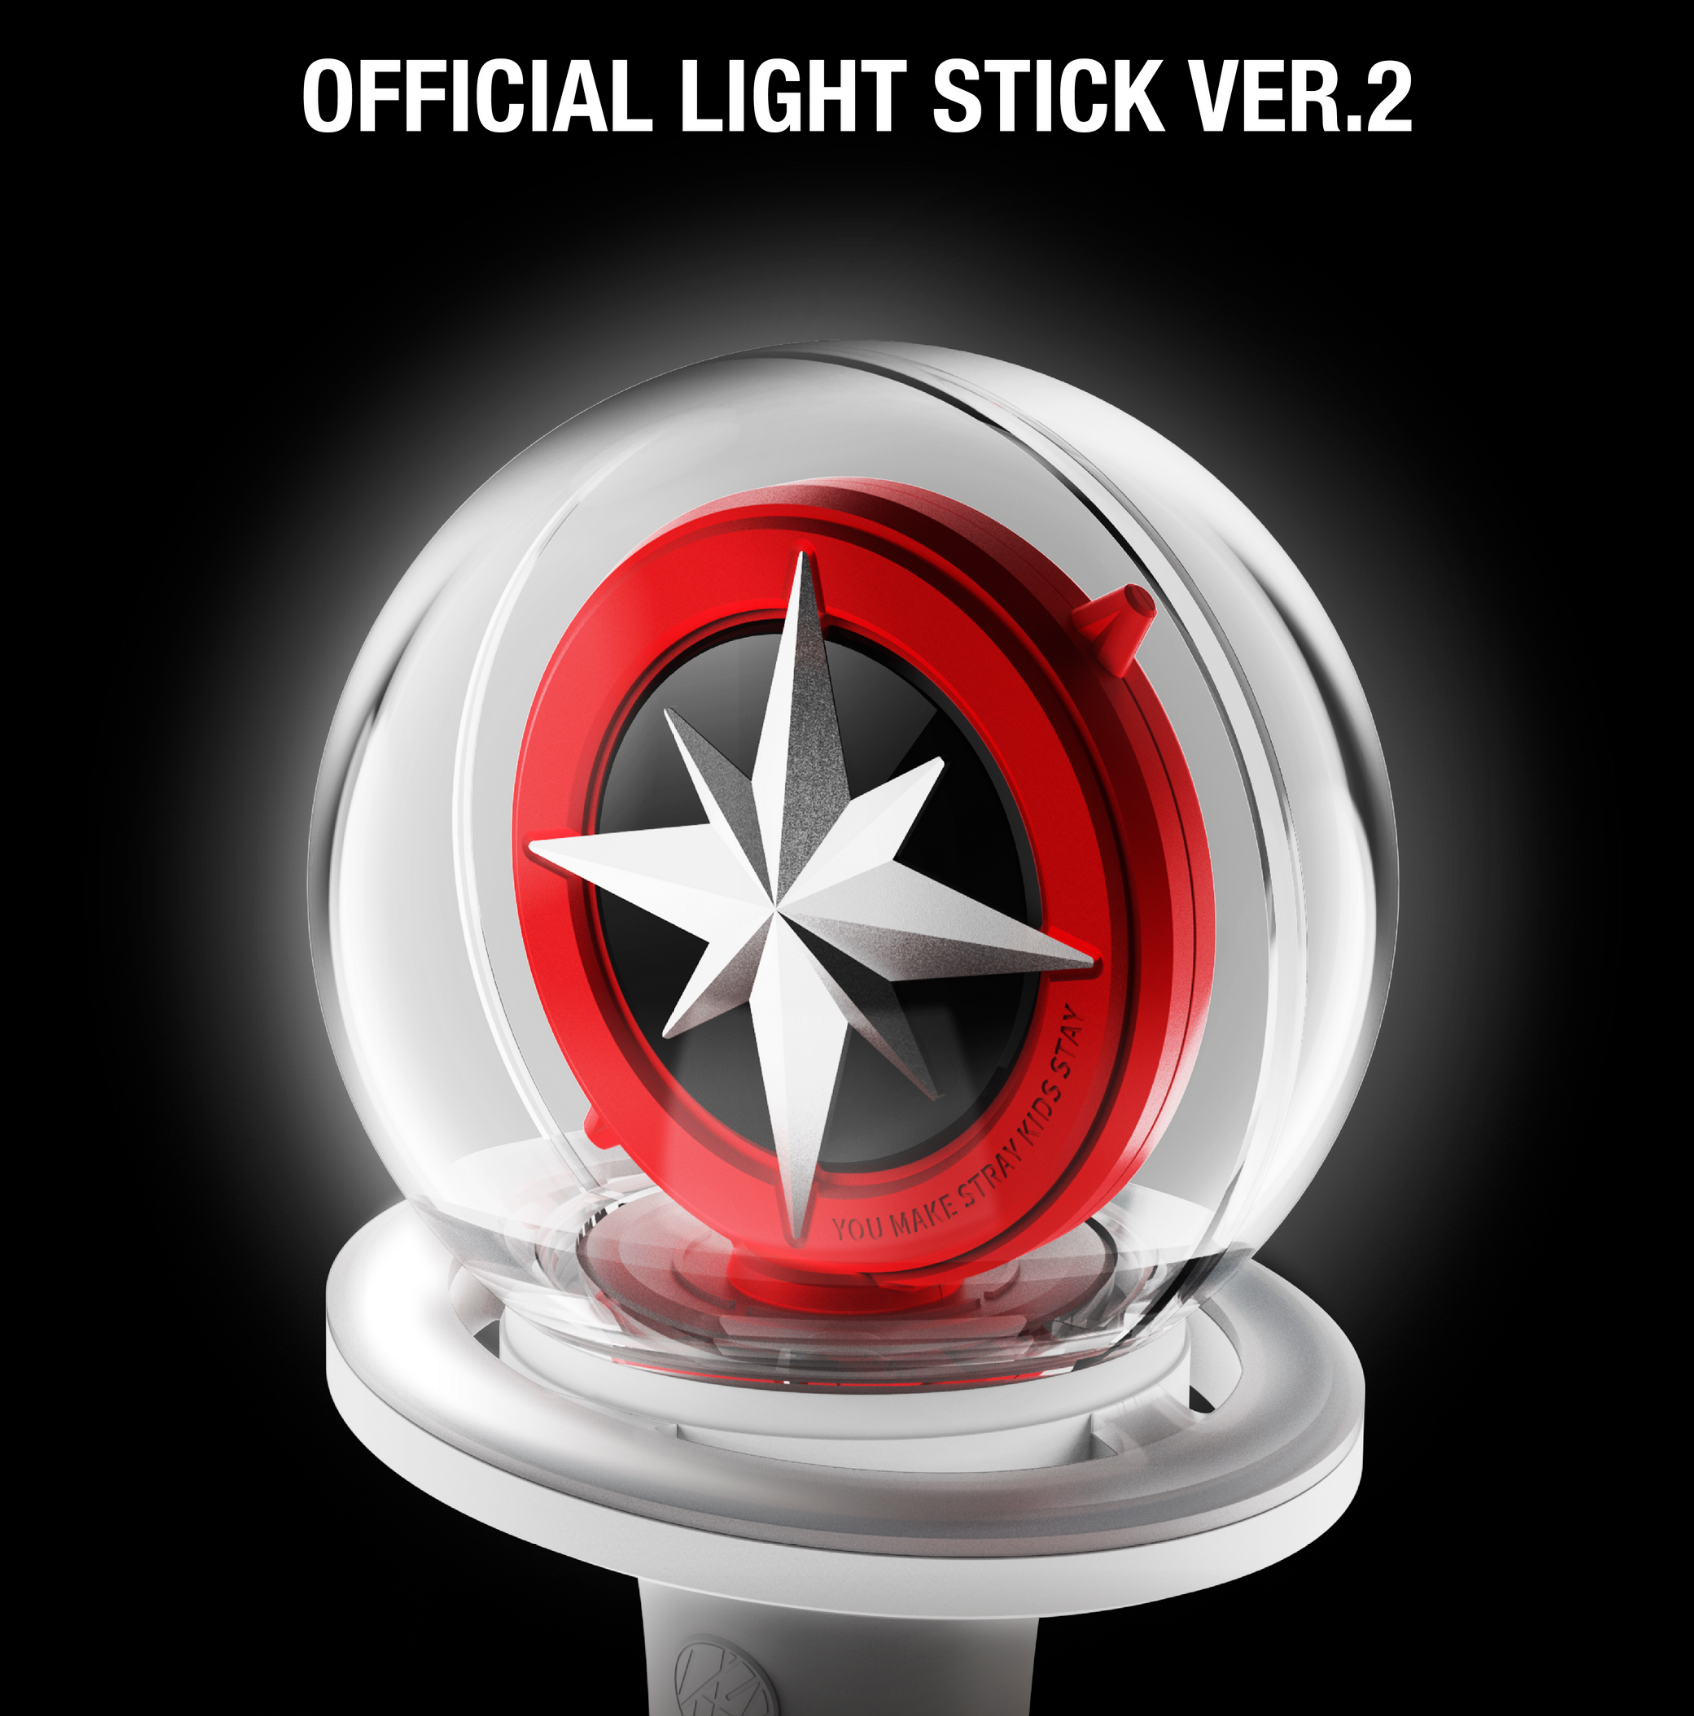 STRAY KIDS] OFFICIAL LIGHT STICK VER.2 OFFICIAL MD – HISWAN